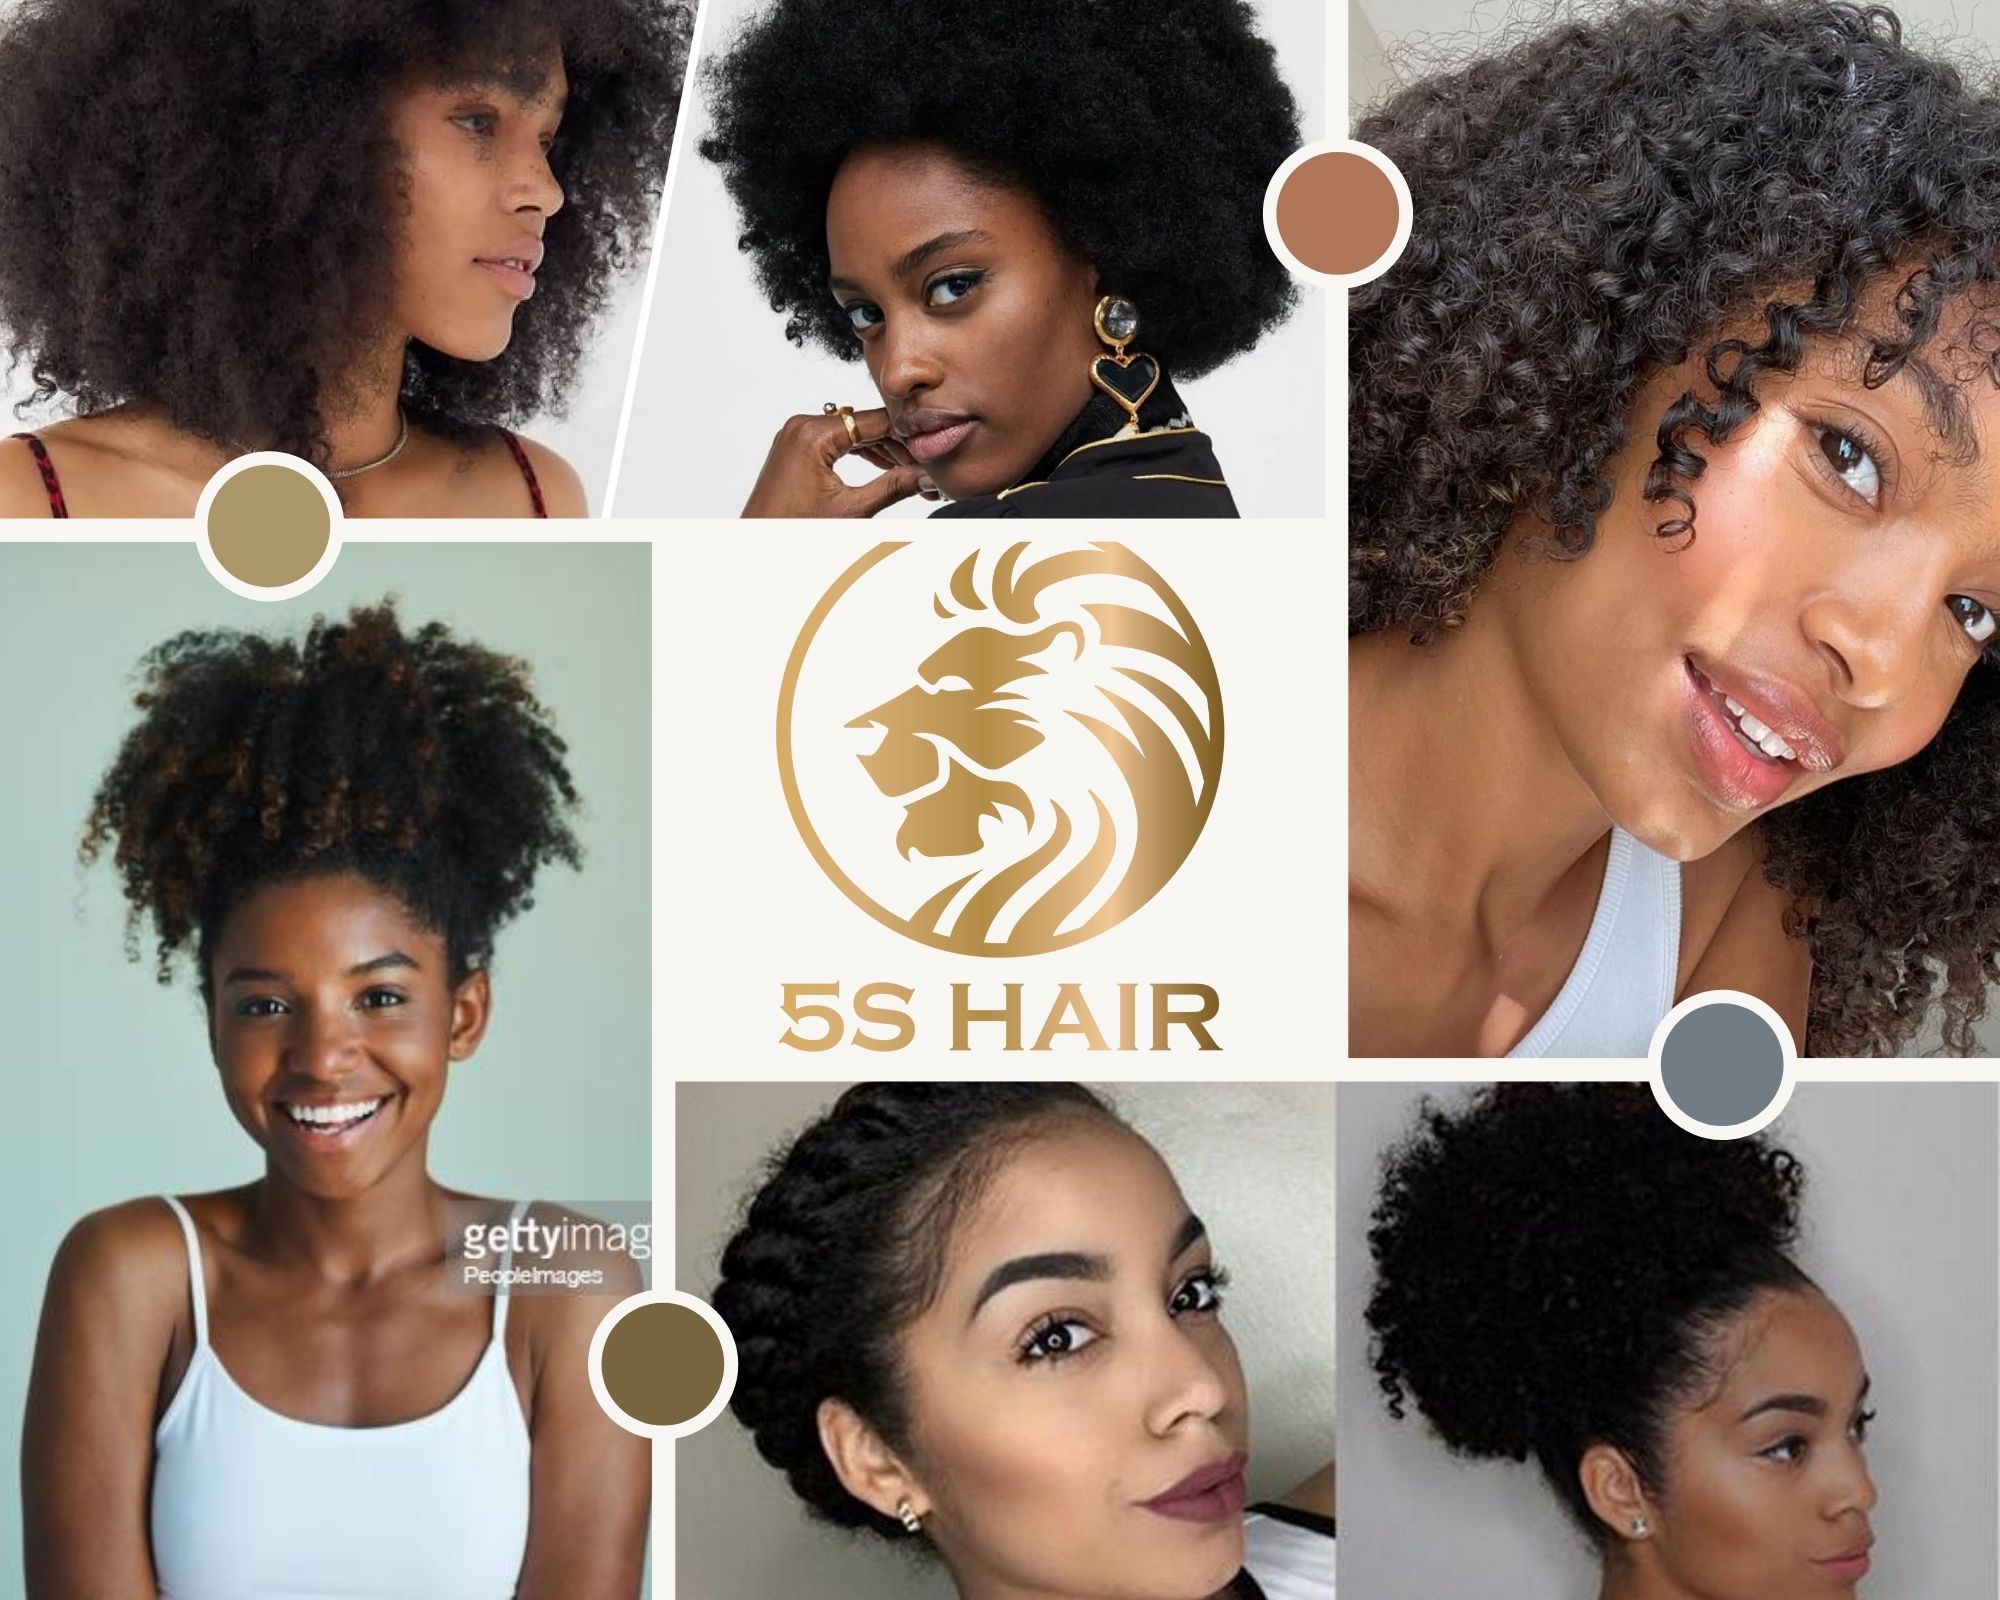 hairstyles for ladies 2022 nigeria latest hairstyle for ladies in nigeria 2022 latest kinky hairstyles in nigeria 2022 latest hair style for ladies in nigeria 2022 new hair style for ladies 2022 nigeria nigeria hair style 2022 latest nigeria hairstyles 2022 trending hairstyles in nigeria 2022 fixing hair style for ladies 2022 hairstyles for ladies 2022 nigeria news female hair cut styles in nigeria 2022 hairstyles for ladies in nigeria 2022 hairstyles for nigerian ladies 2022